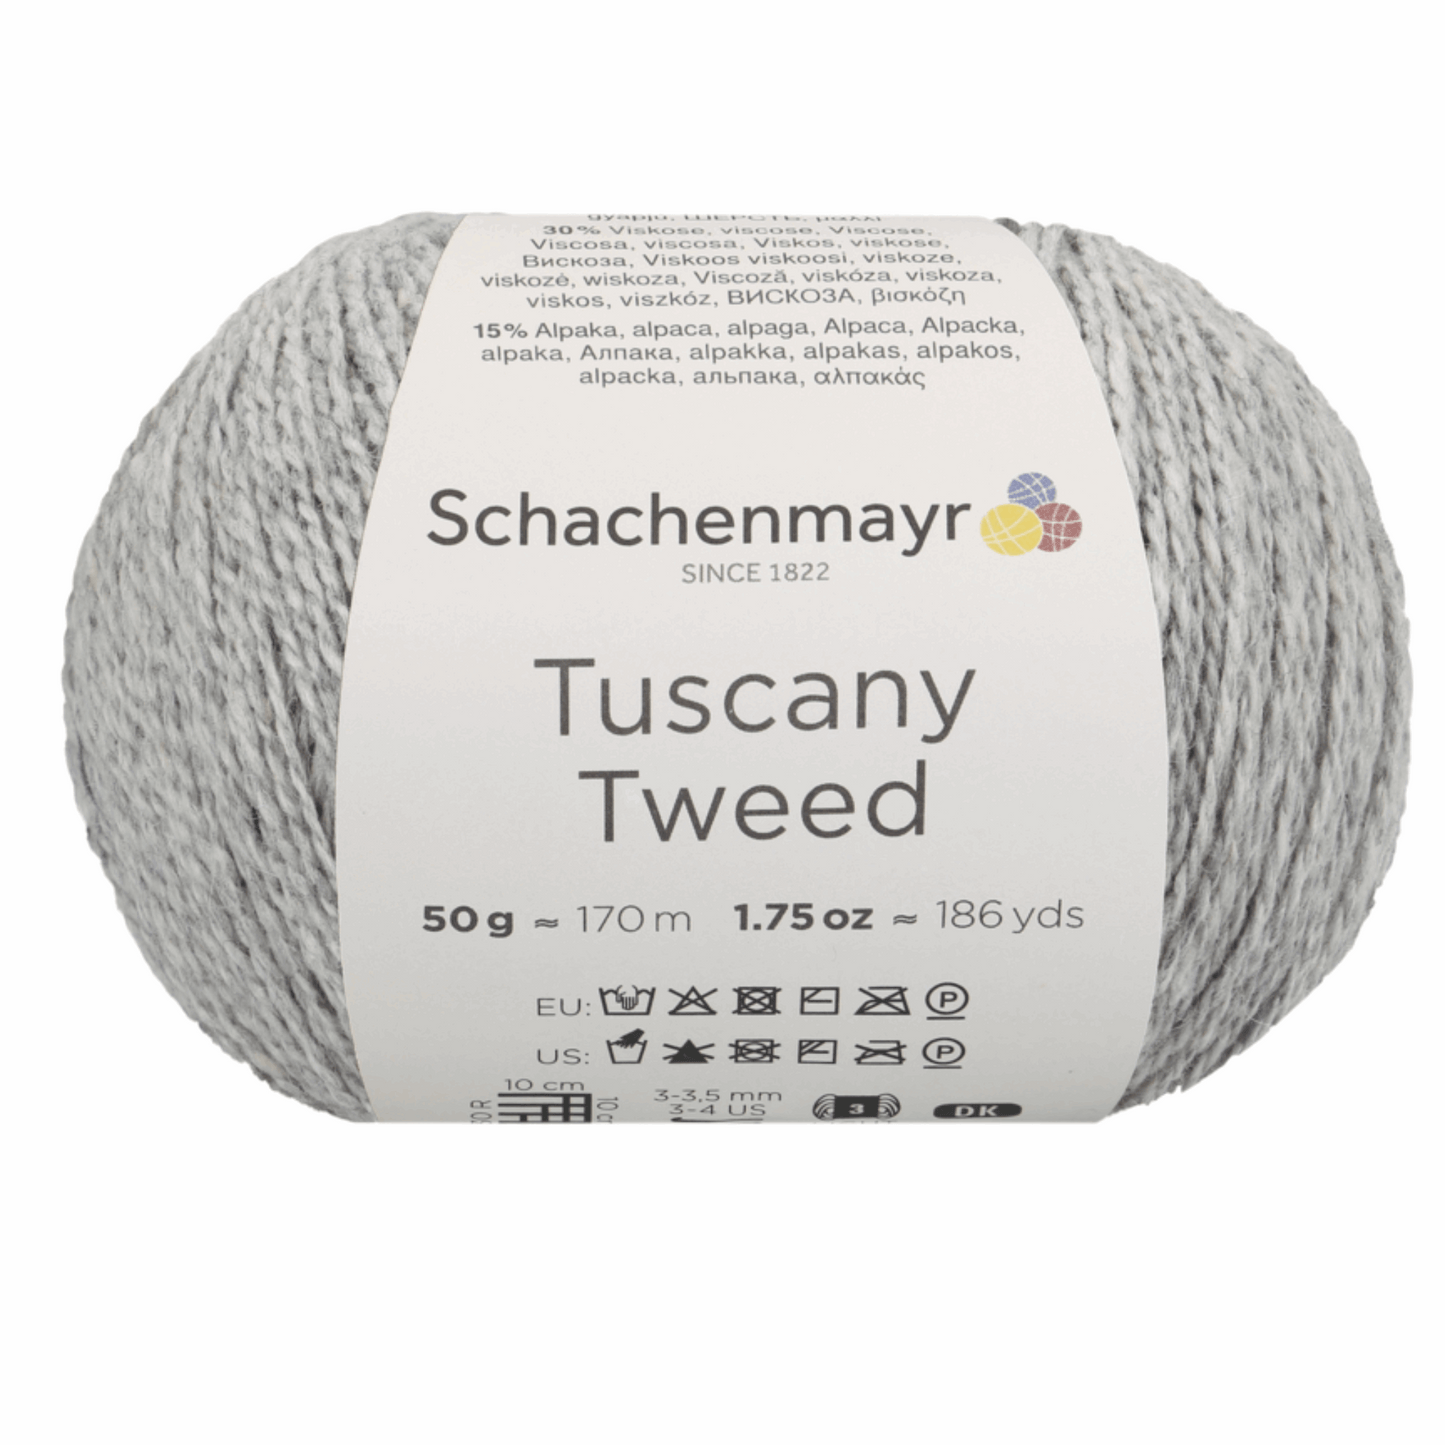 Schachenmayr Tuscany Tweed, 97002, Farbe silber 90